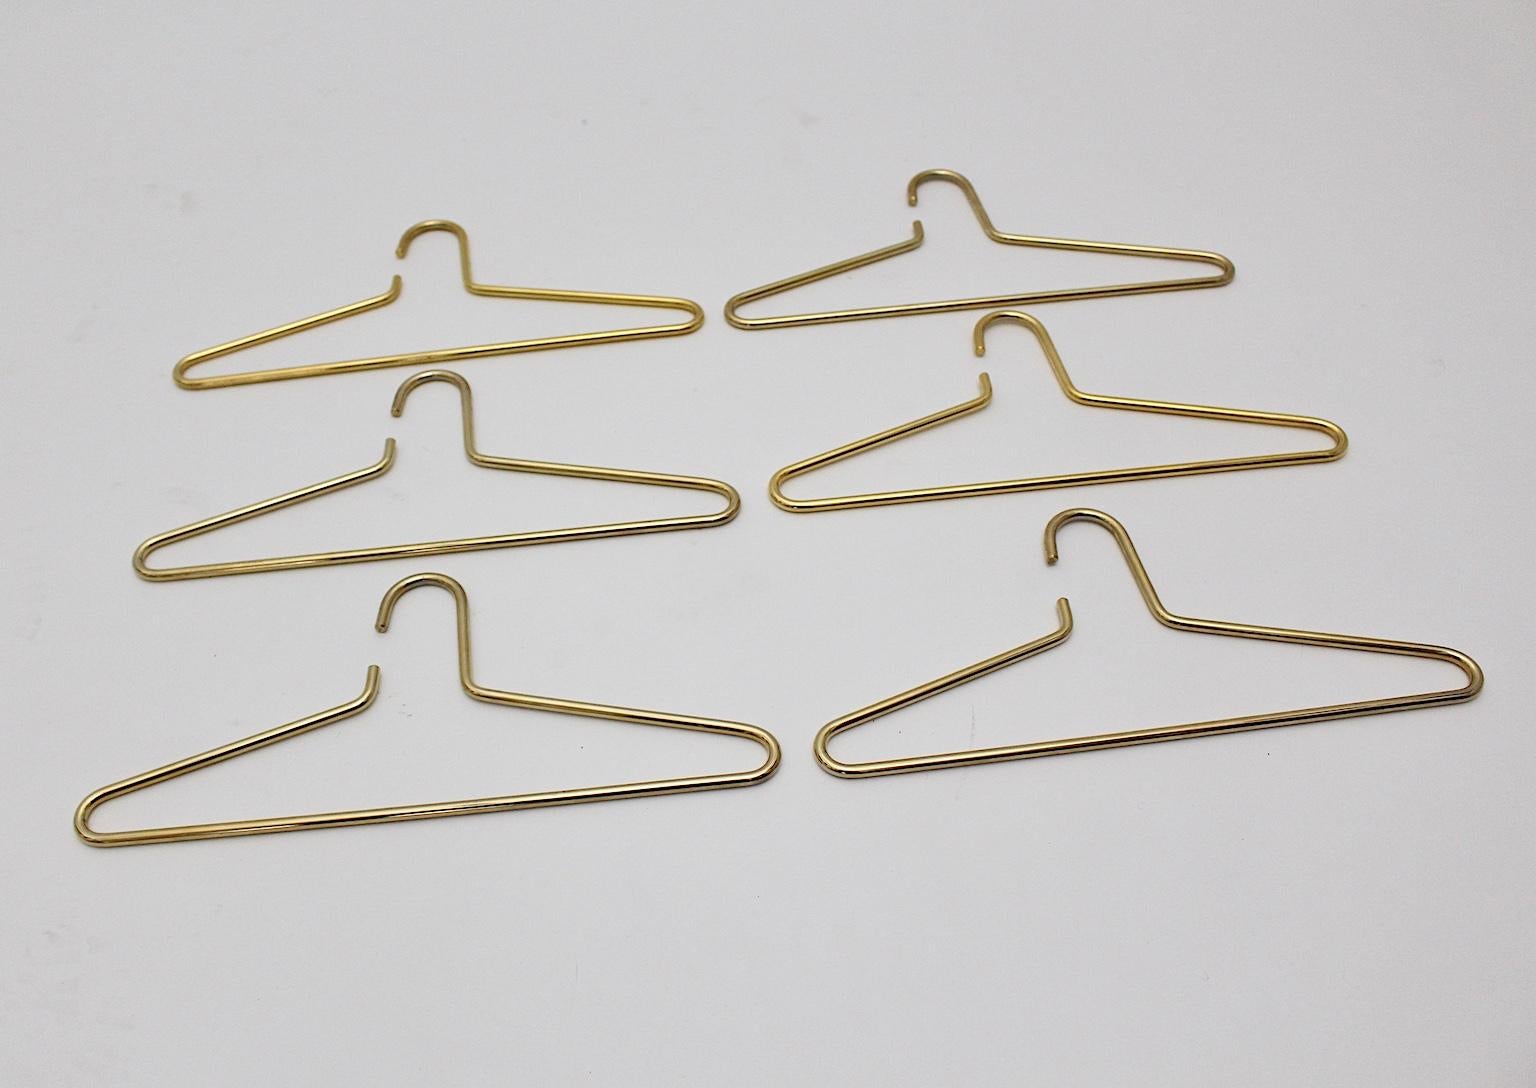 This modern set of six vintage cloth hangers was made of brass-plated metal.
Very good condition with some signs of age.
Approximate measures:
Width 42 cm
Height 19 cm
Thickness 0.8 cm.